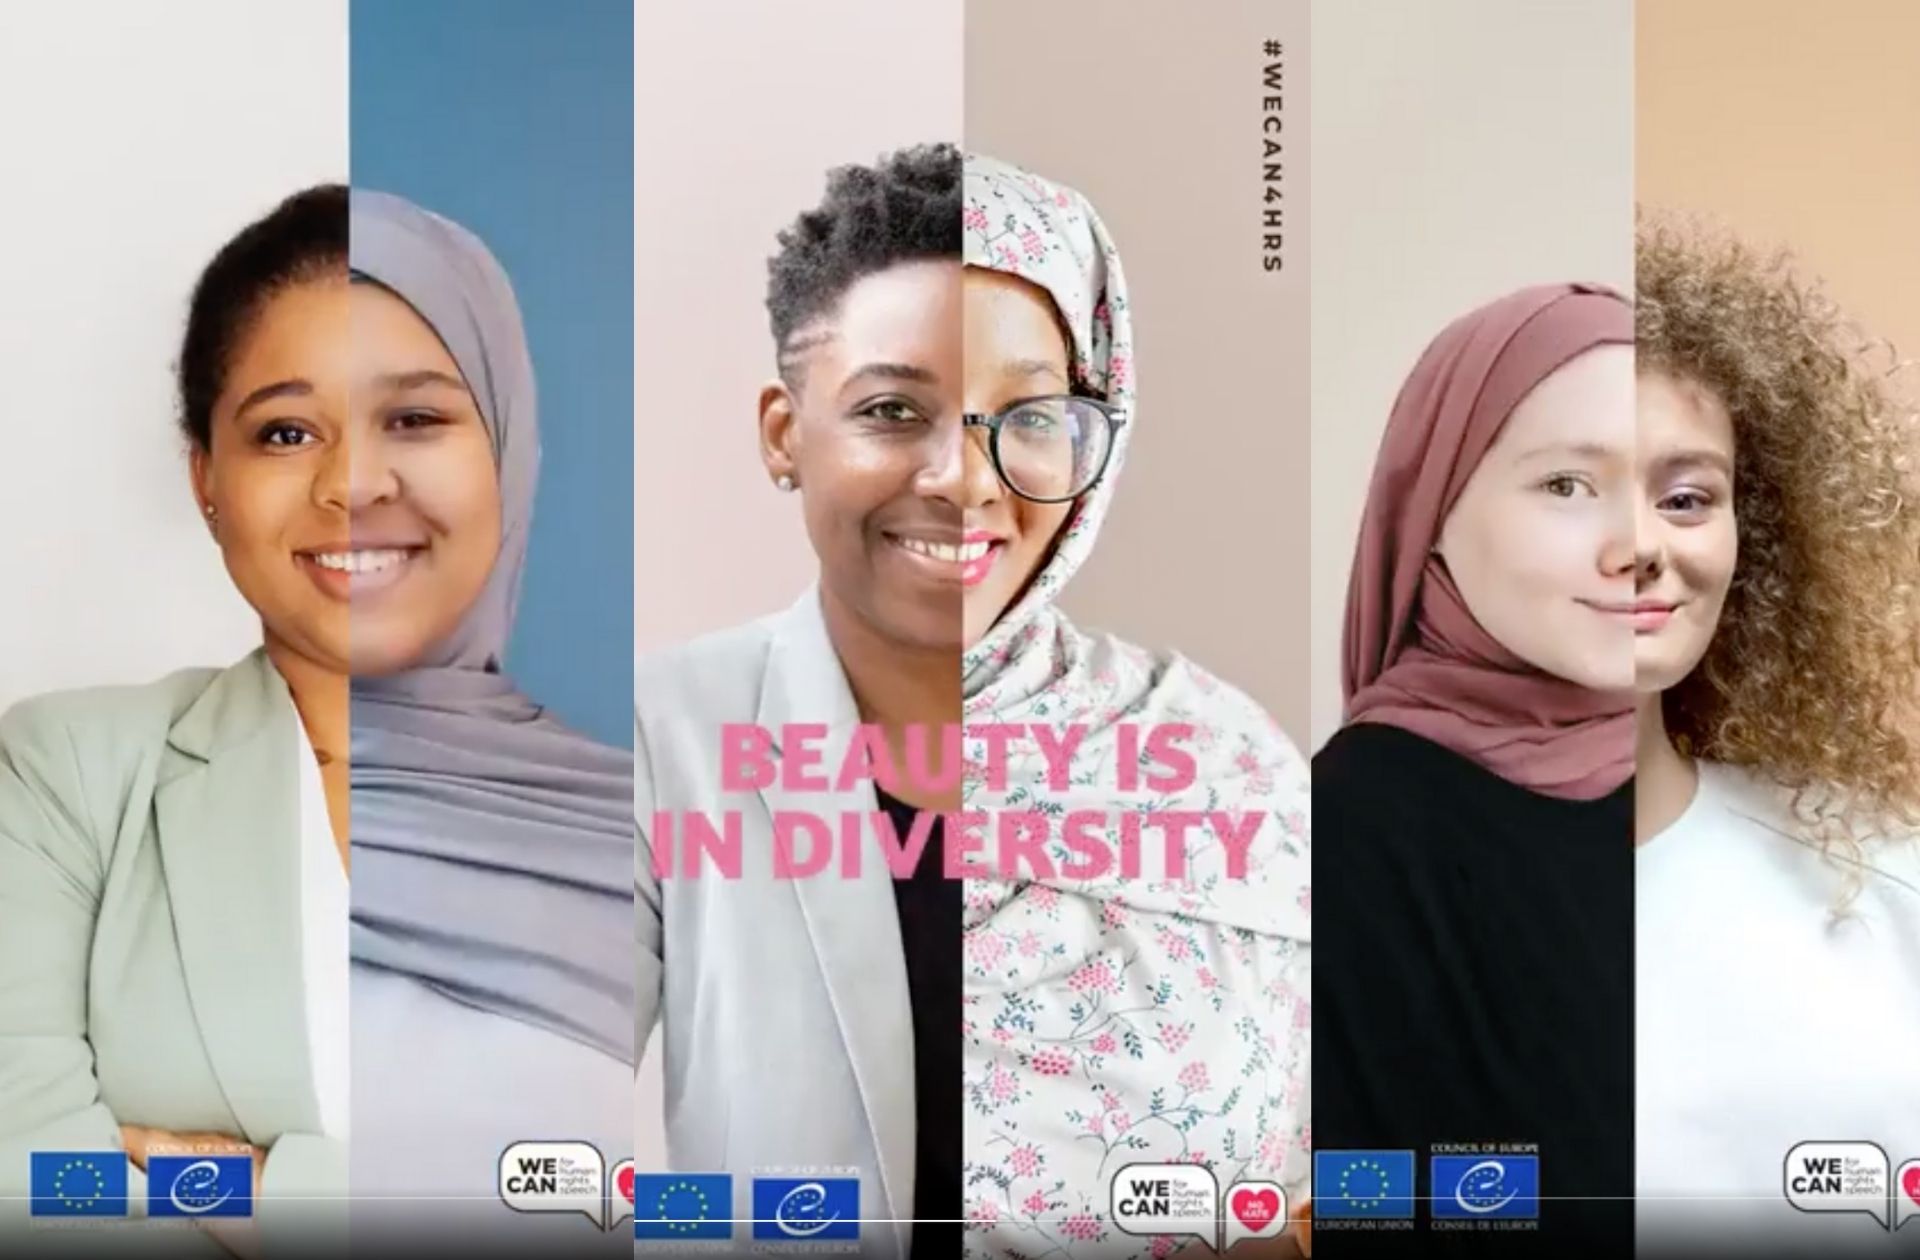 beauty-is-diversity-as-freedom-is-in-hijab-visuels-campagne